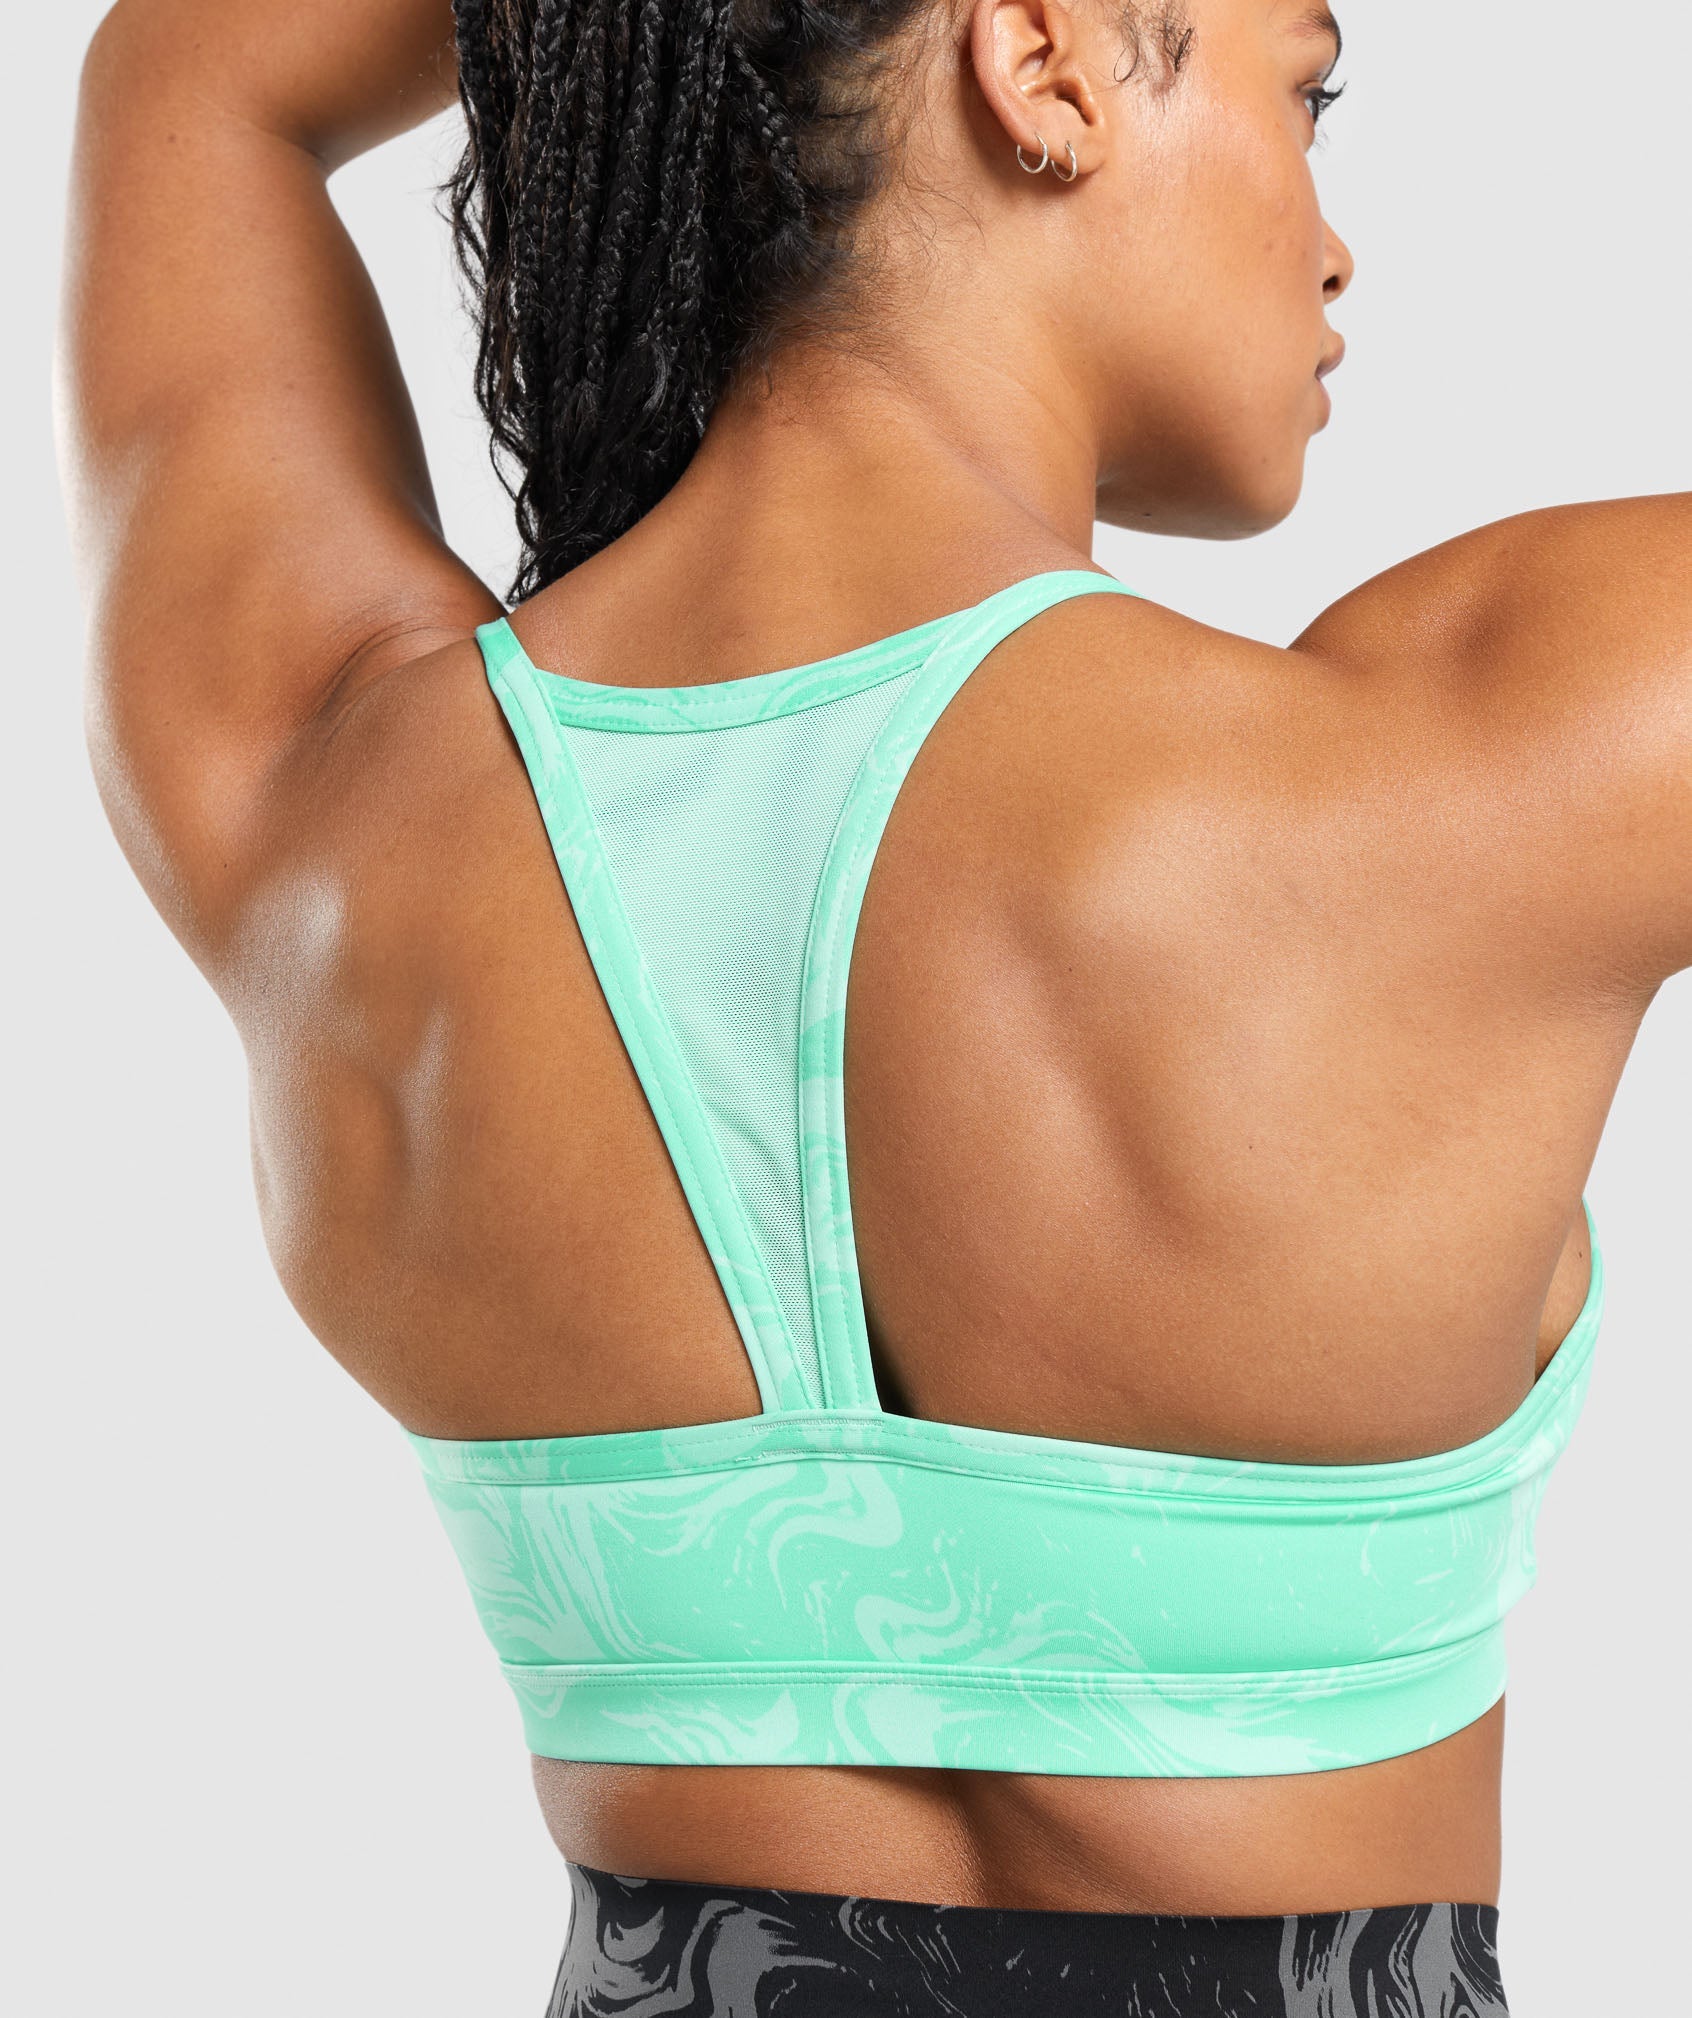 GS Power Sports Bra in Bright Turquoise Print - view 5